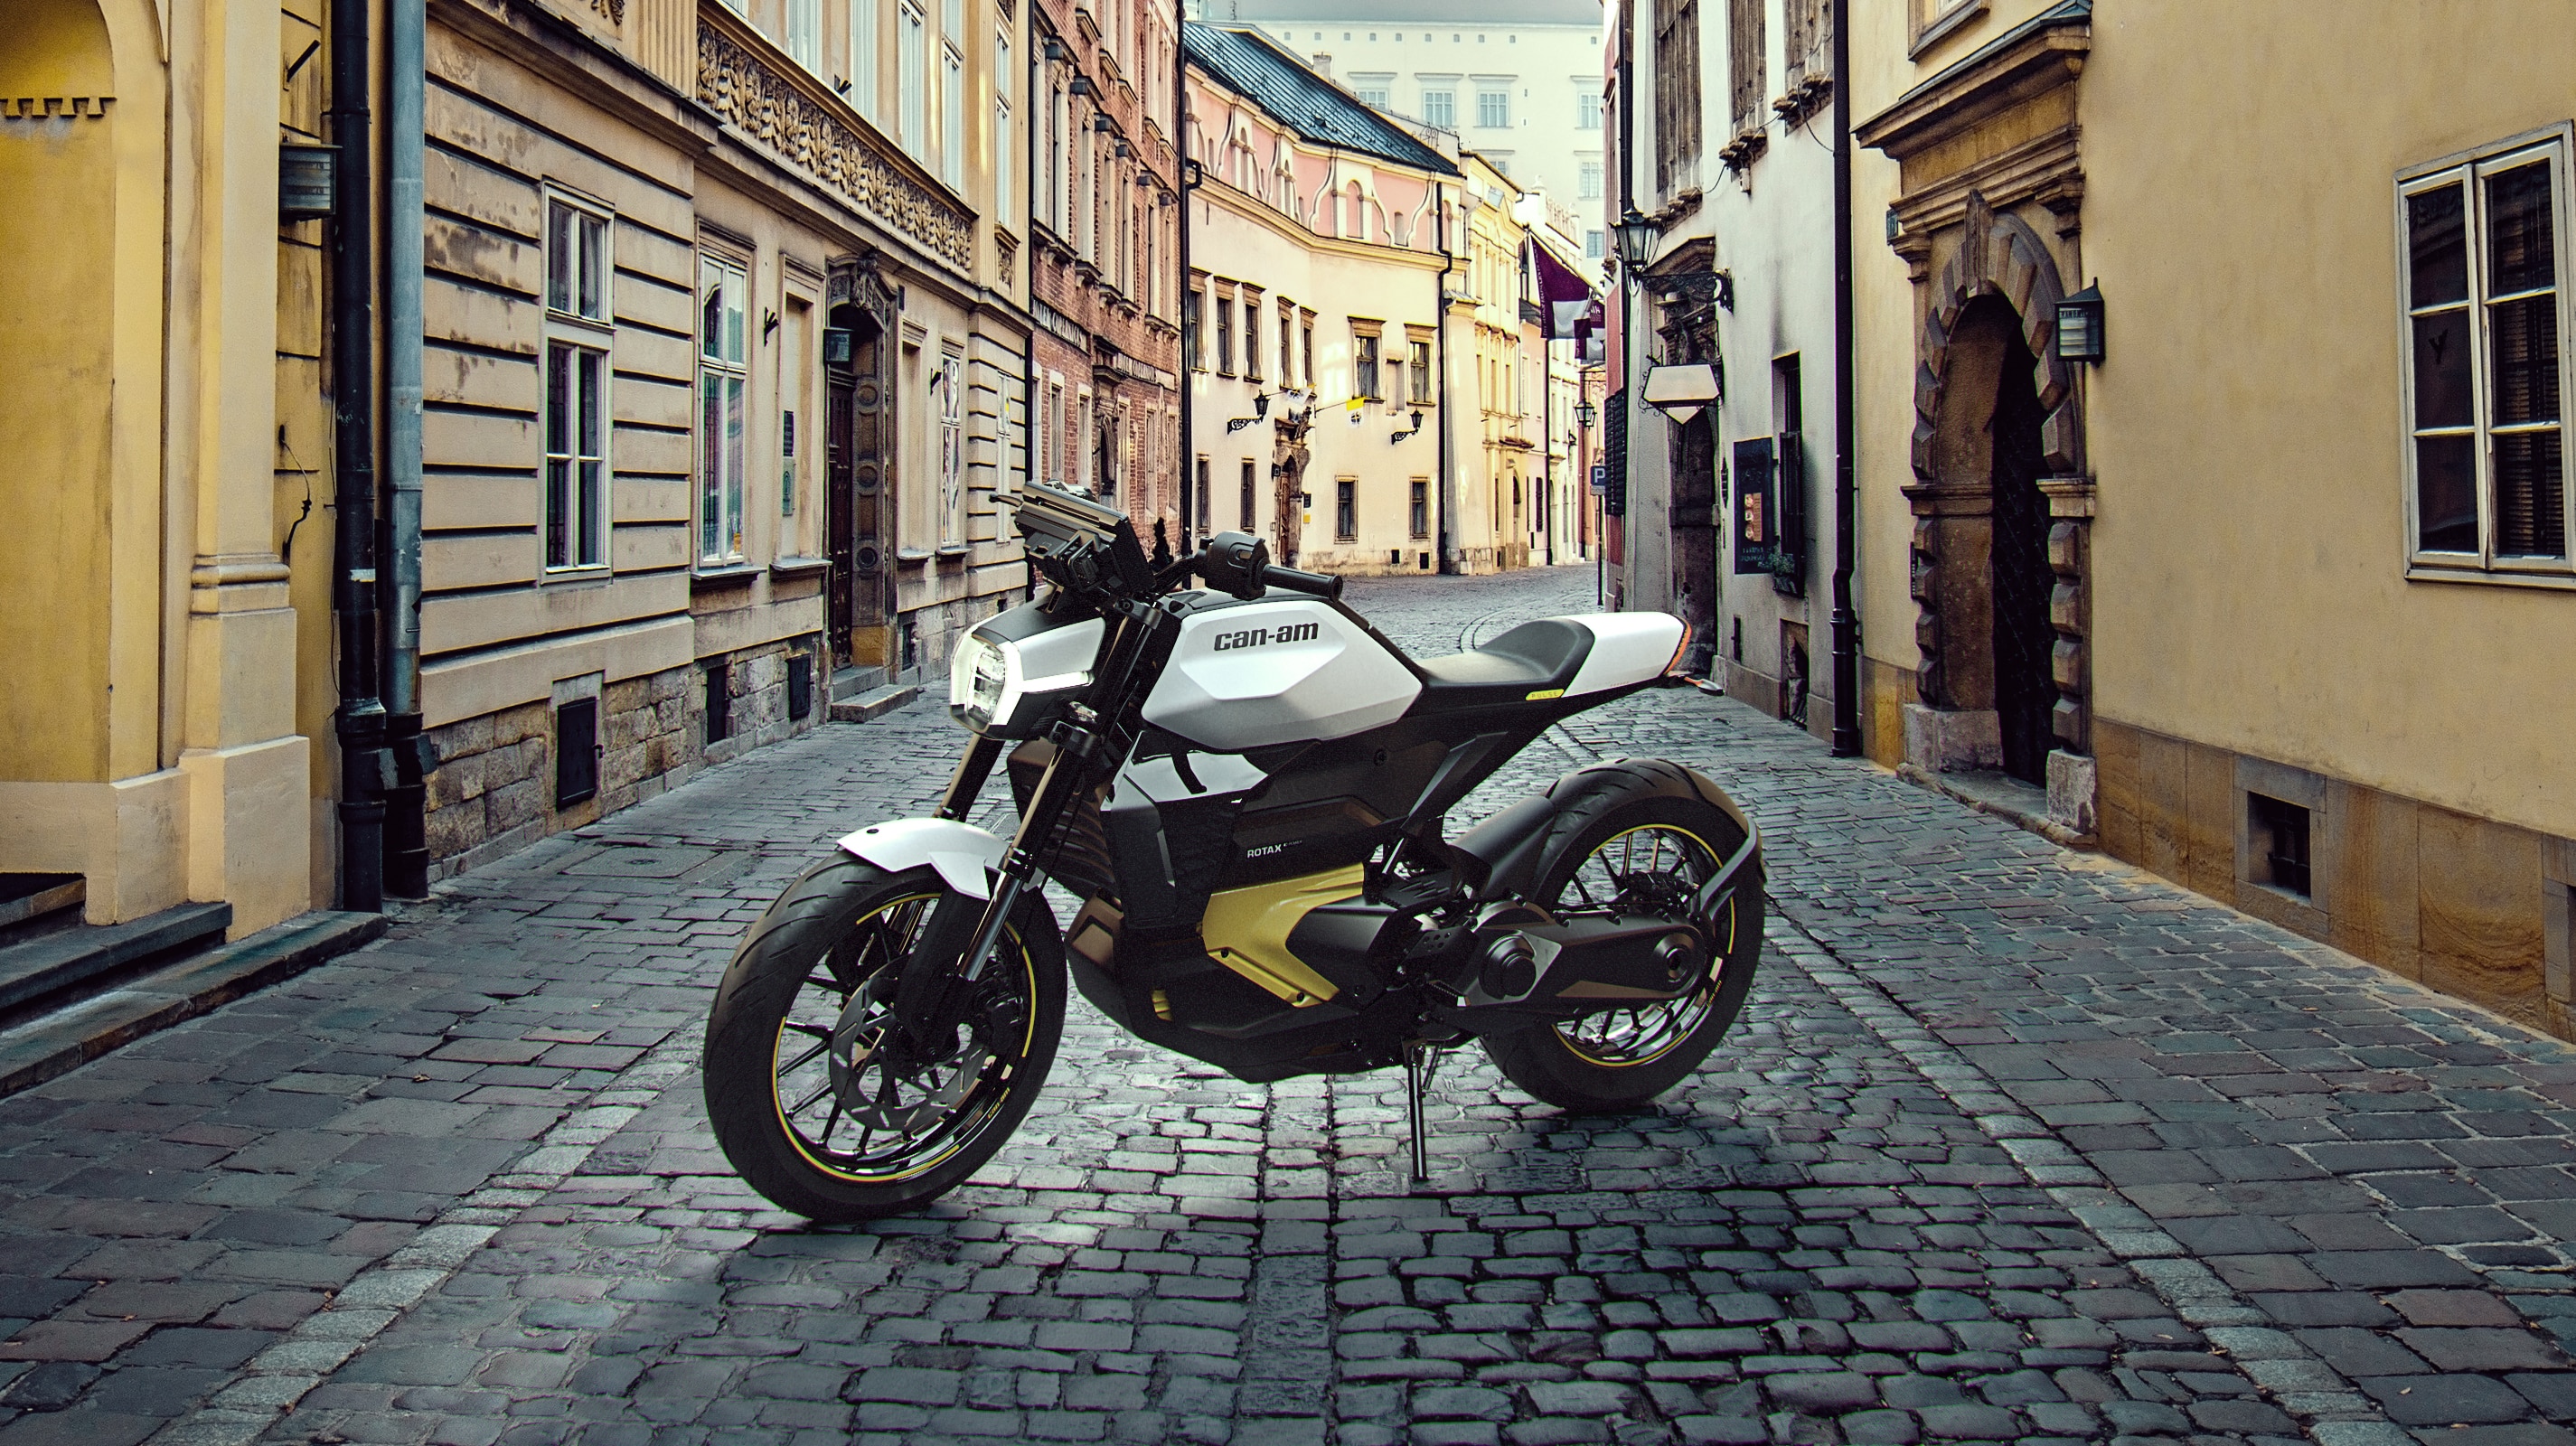 Can-Am Electric Motorcycle in the streets of Barcelona